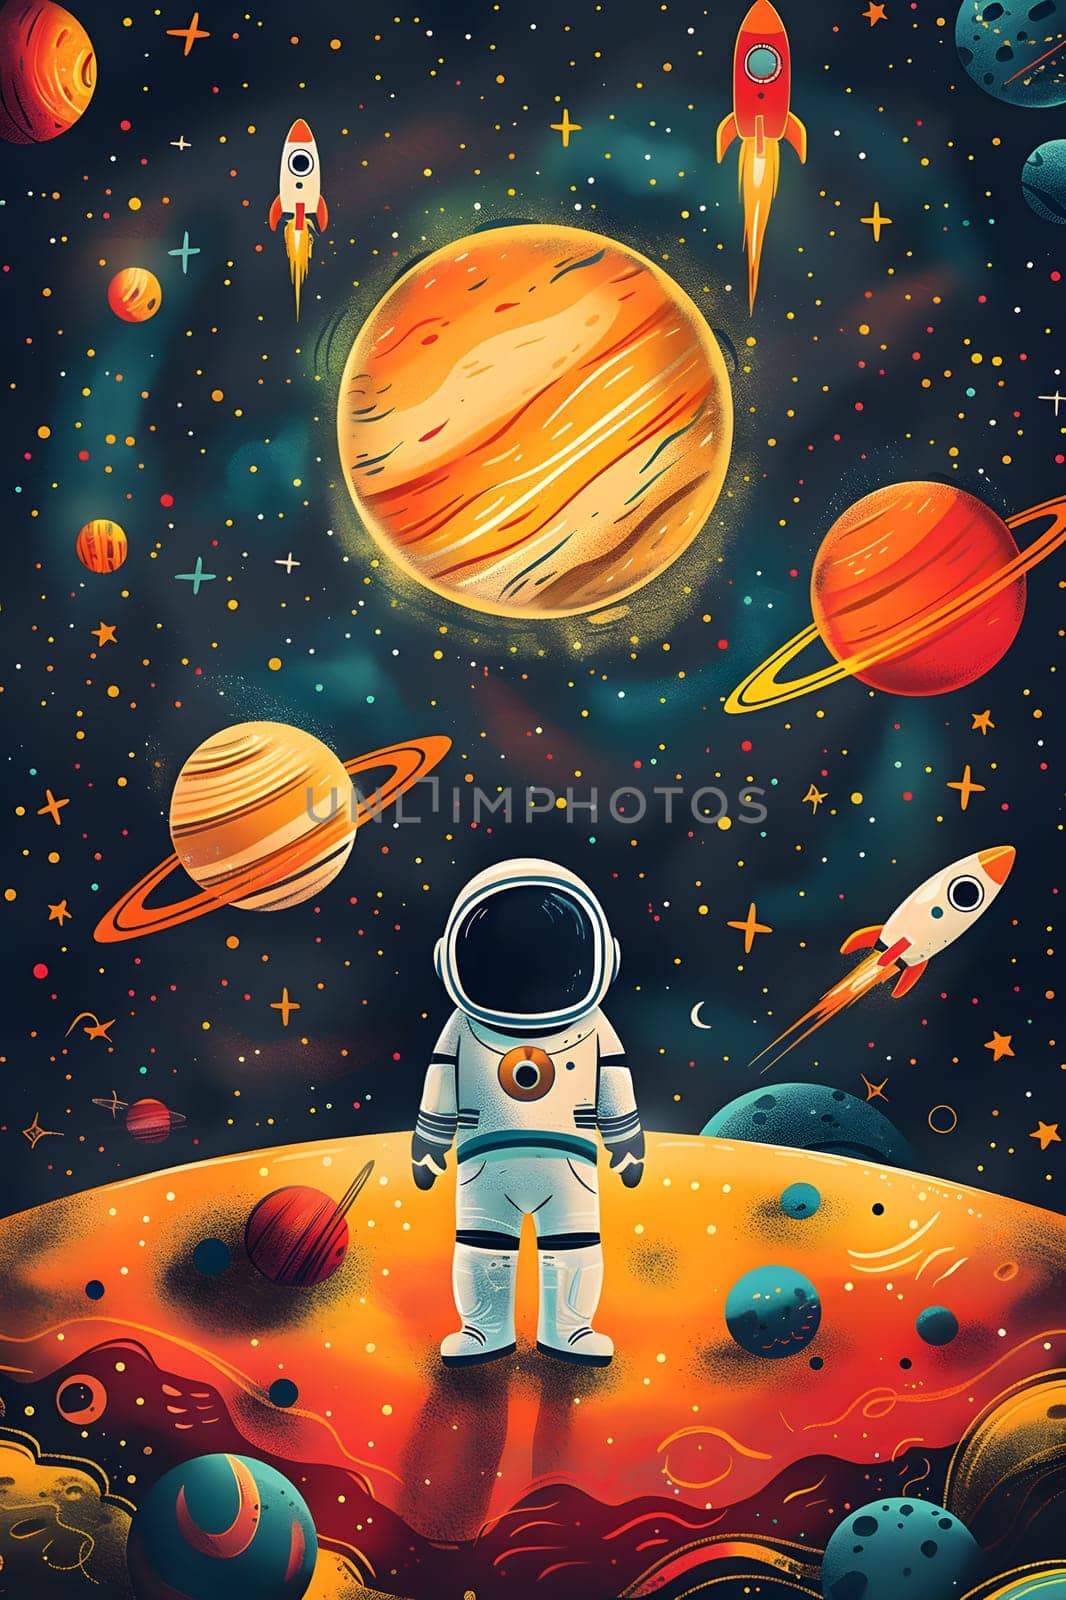 An astronaut is standing on an orange planet, surrounded by rockets and other astronomical objects in space. The world is filled with lighting and creative arts, resembling a painting of the universe